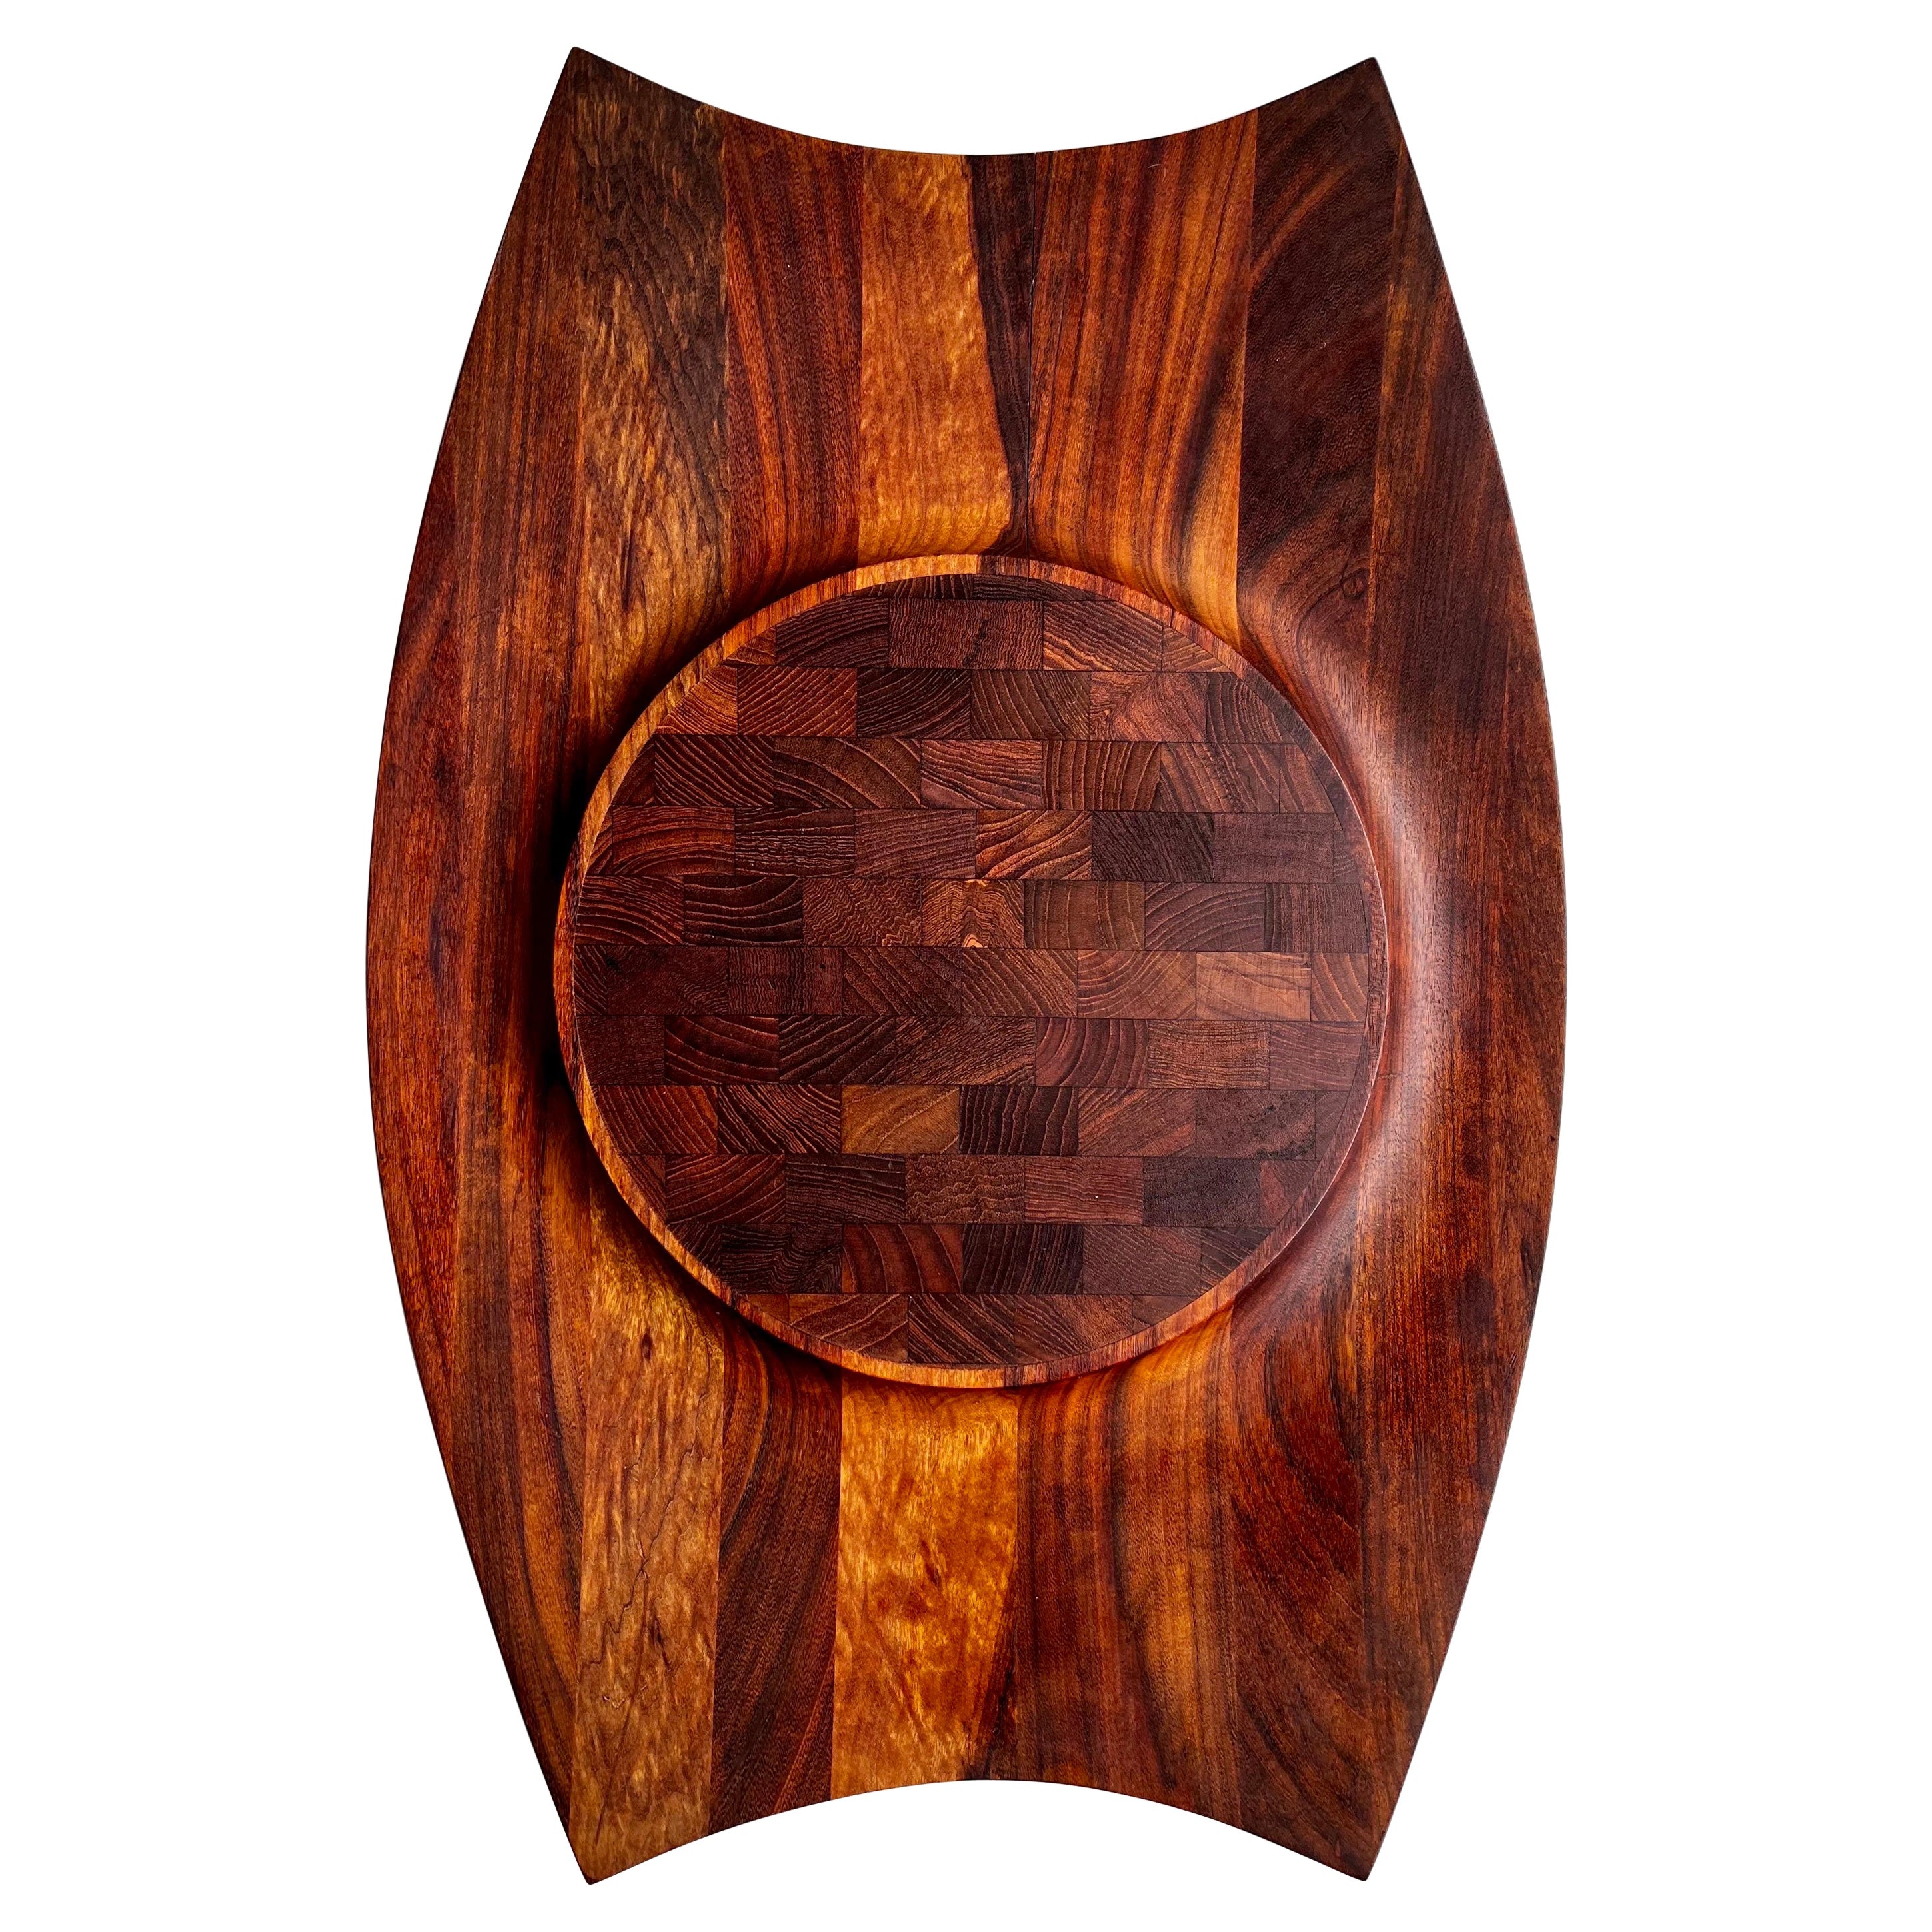 Mutenye "Rare Woods" Tray by Jens Quistgaard for Dansk Designs, circa 1960